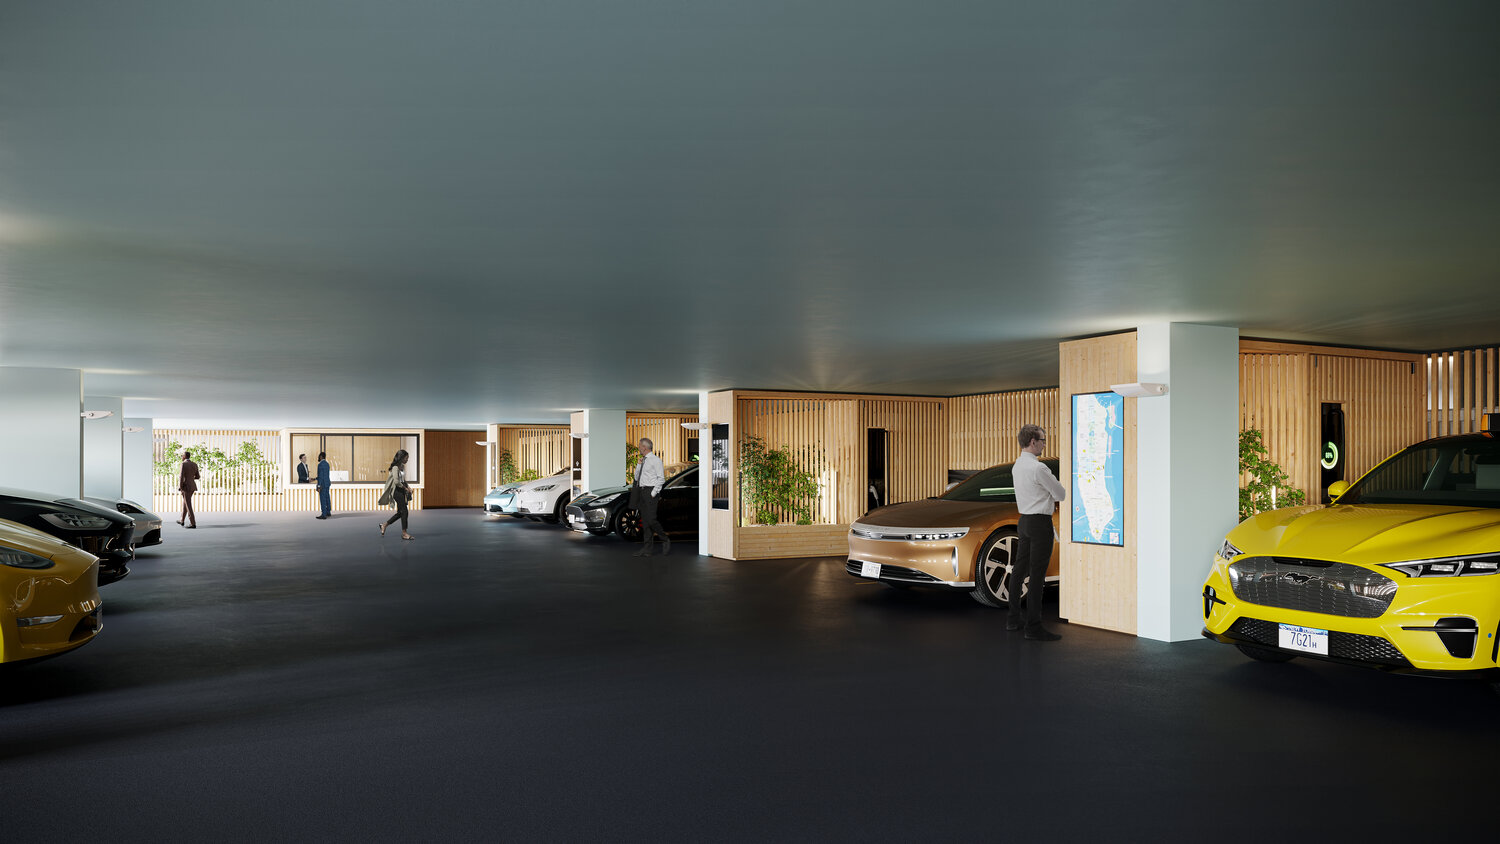 Rendering of Midtown Plaza's Gravity Charging Center in use - Photo Courtesy of Gravity